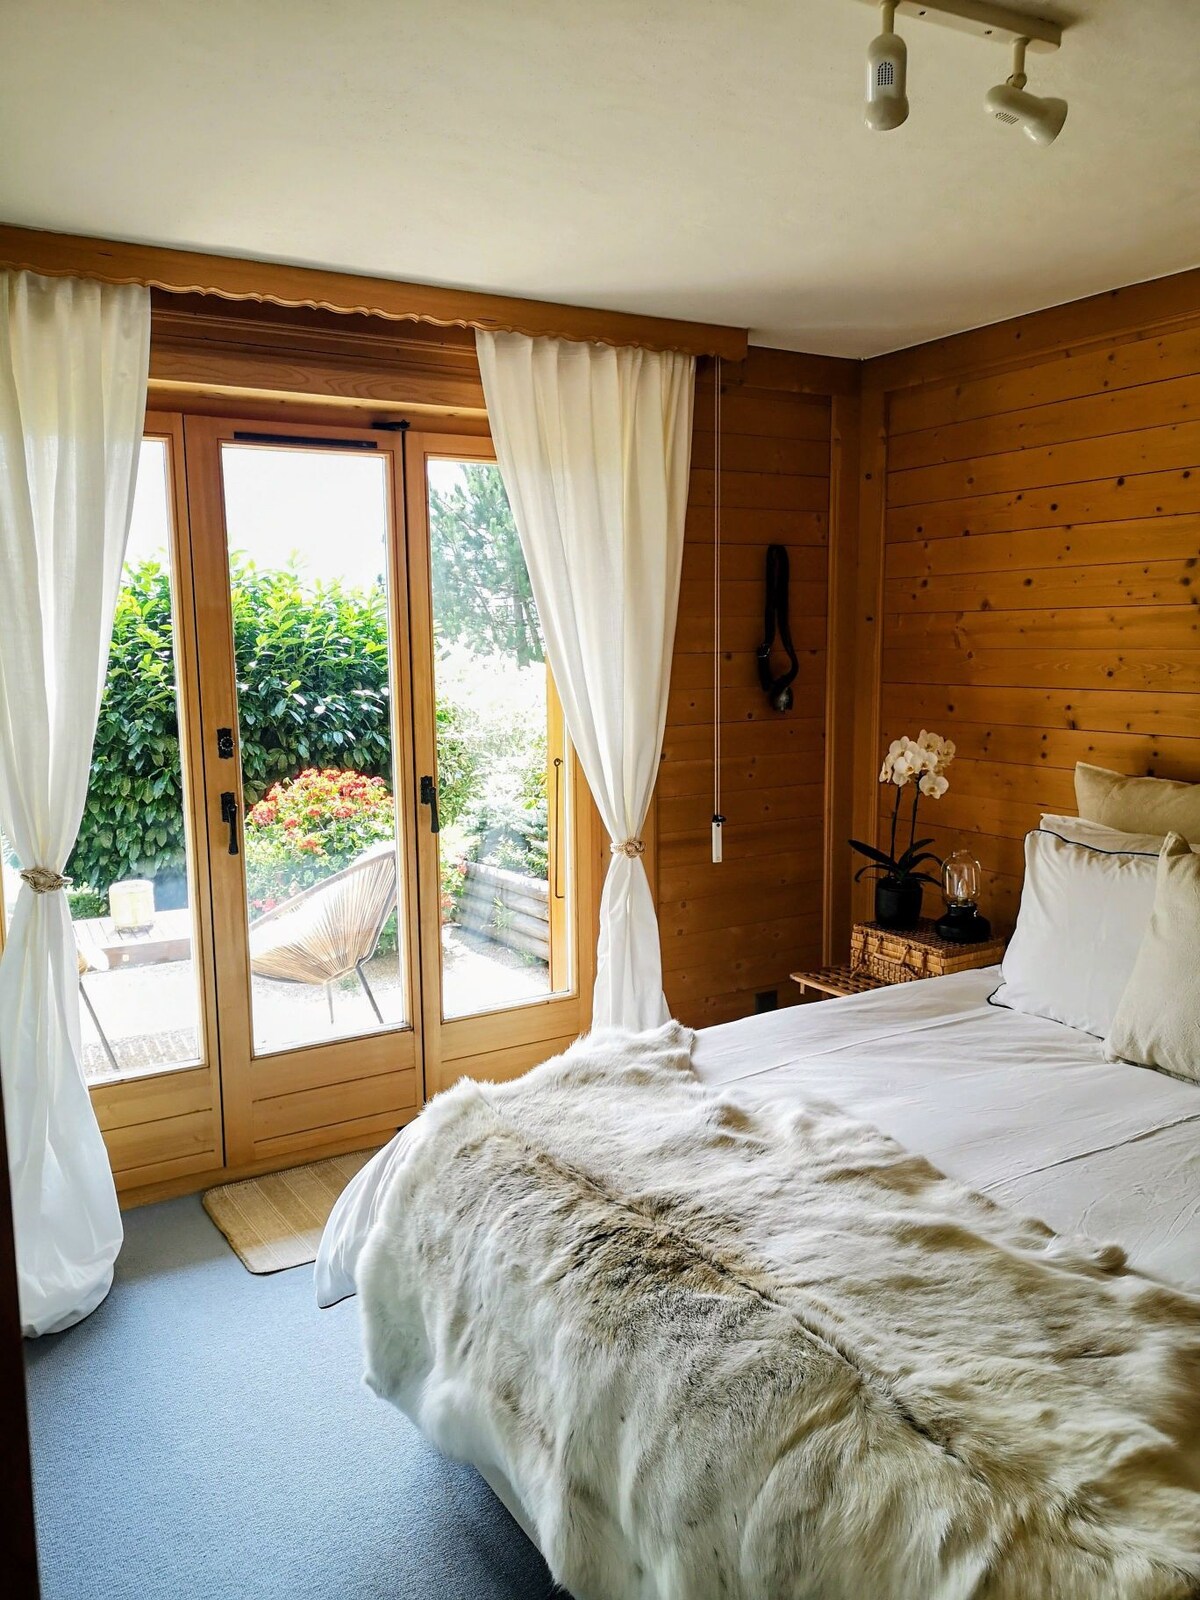 Stunning little pied-à-terre 15min from Gstaad!